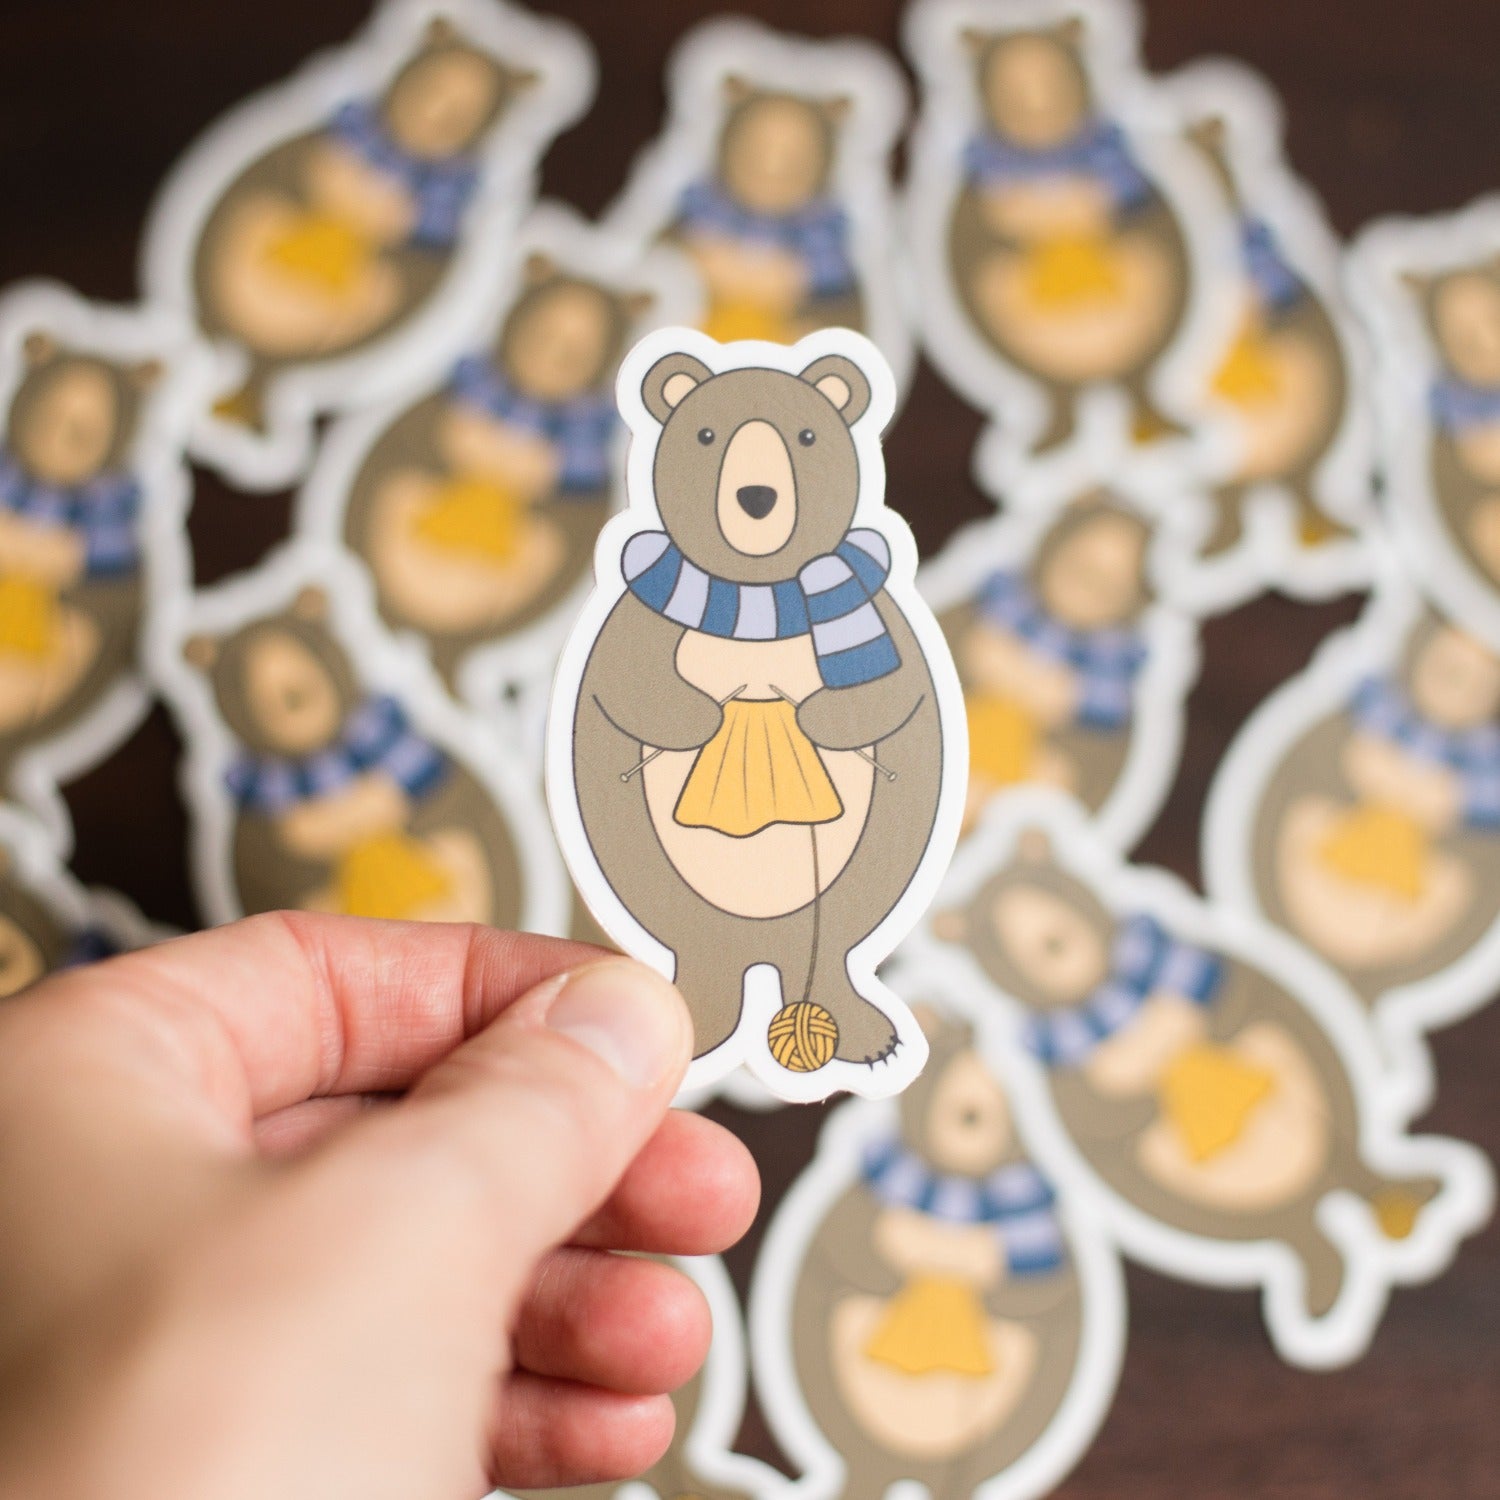 Bear with scarf vinyl knitting sticker by adKnits